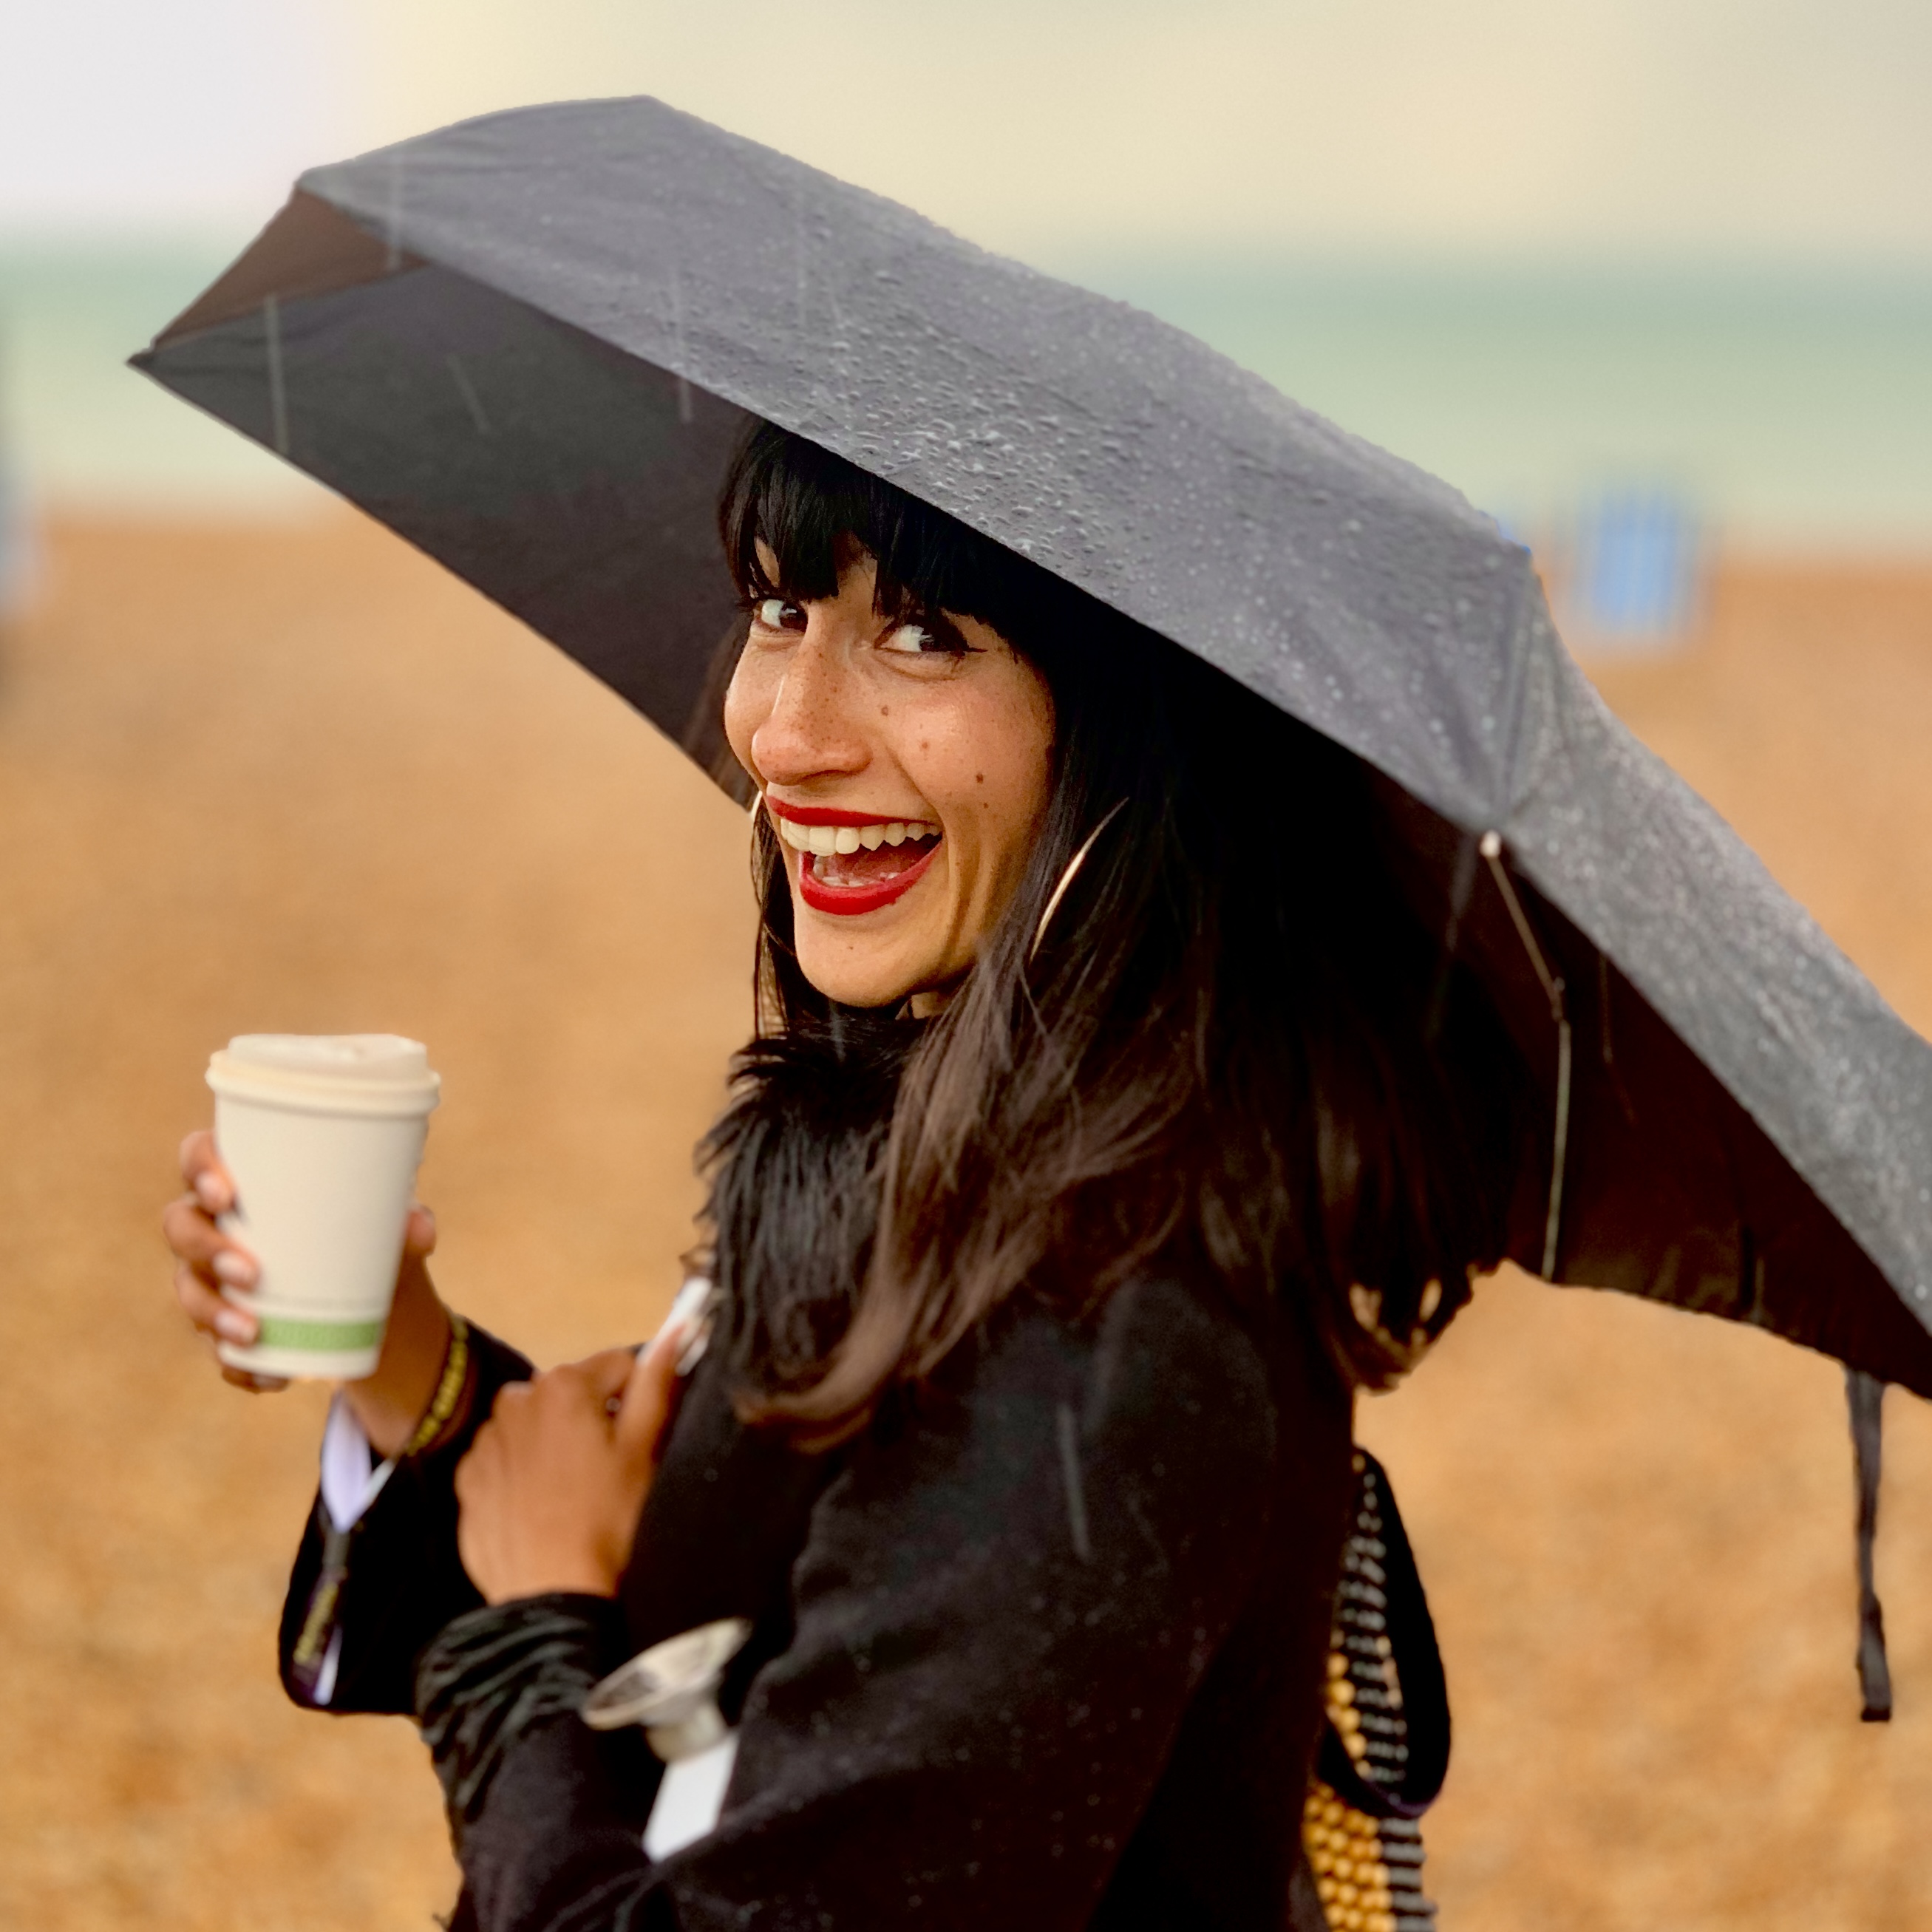 A portrait photograph of Susie Thornberry on a beach smiling while holding an umbrella and a takeaway coffee cup